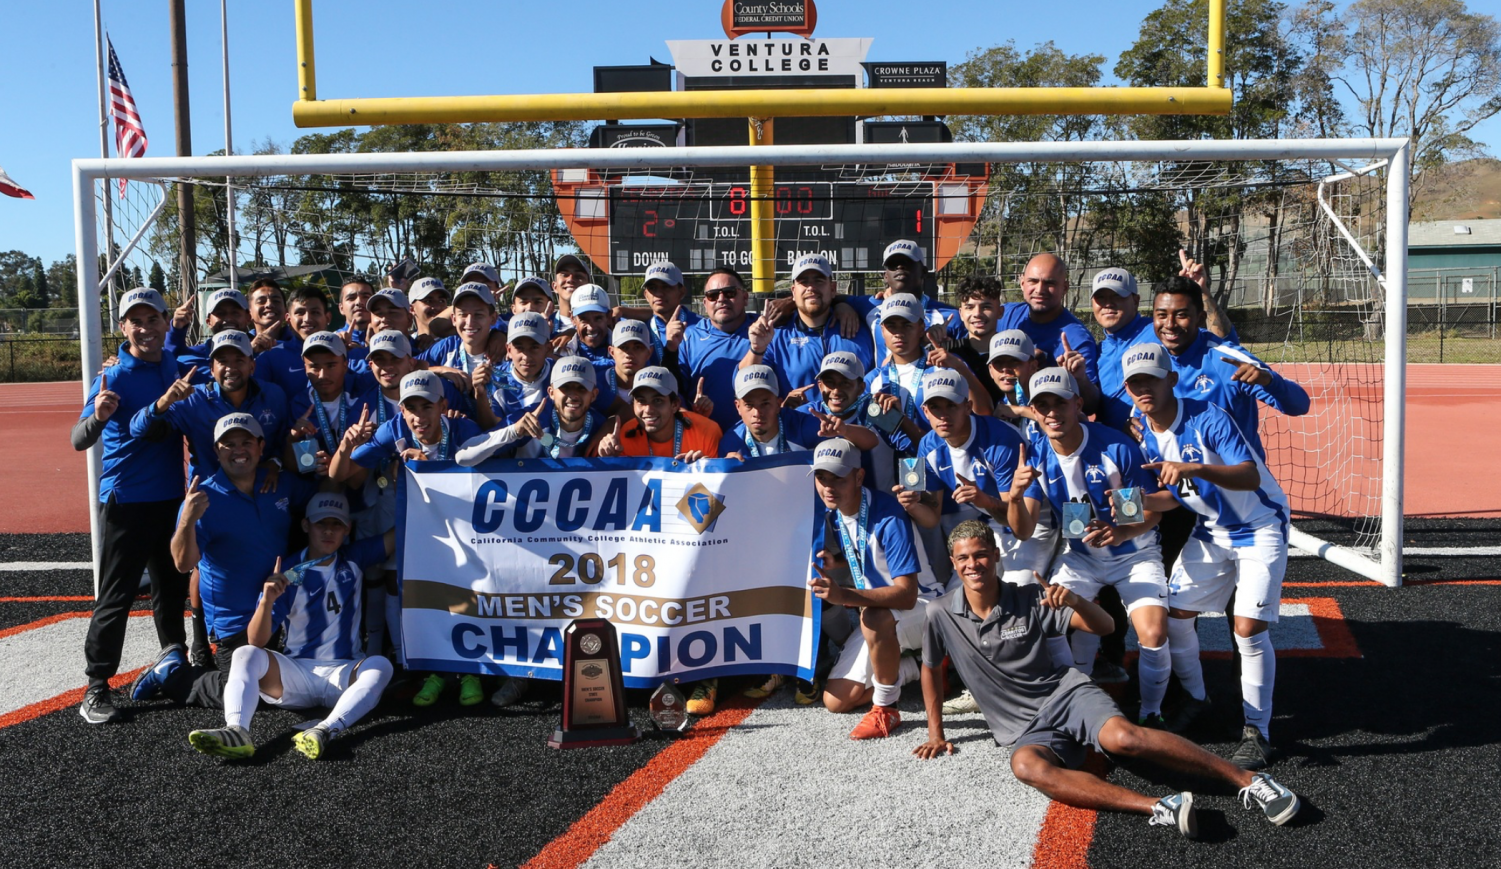 The Cerritos College mens soccer team won the California Community College Athletic Association State Championship against Golden West College, after a successful season. The team managed to tie the game late in the second half and won the game after Golden West College conceded a tie-breaking penalty allowing the Falcons to emerge victorious 2-1, at Ventura College on Dec. 2, 2018.
Photo courtesy of Daryl Peterson/Cerritos Sports Information